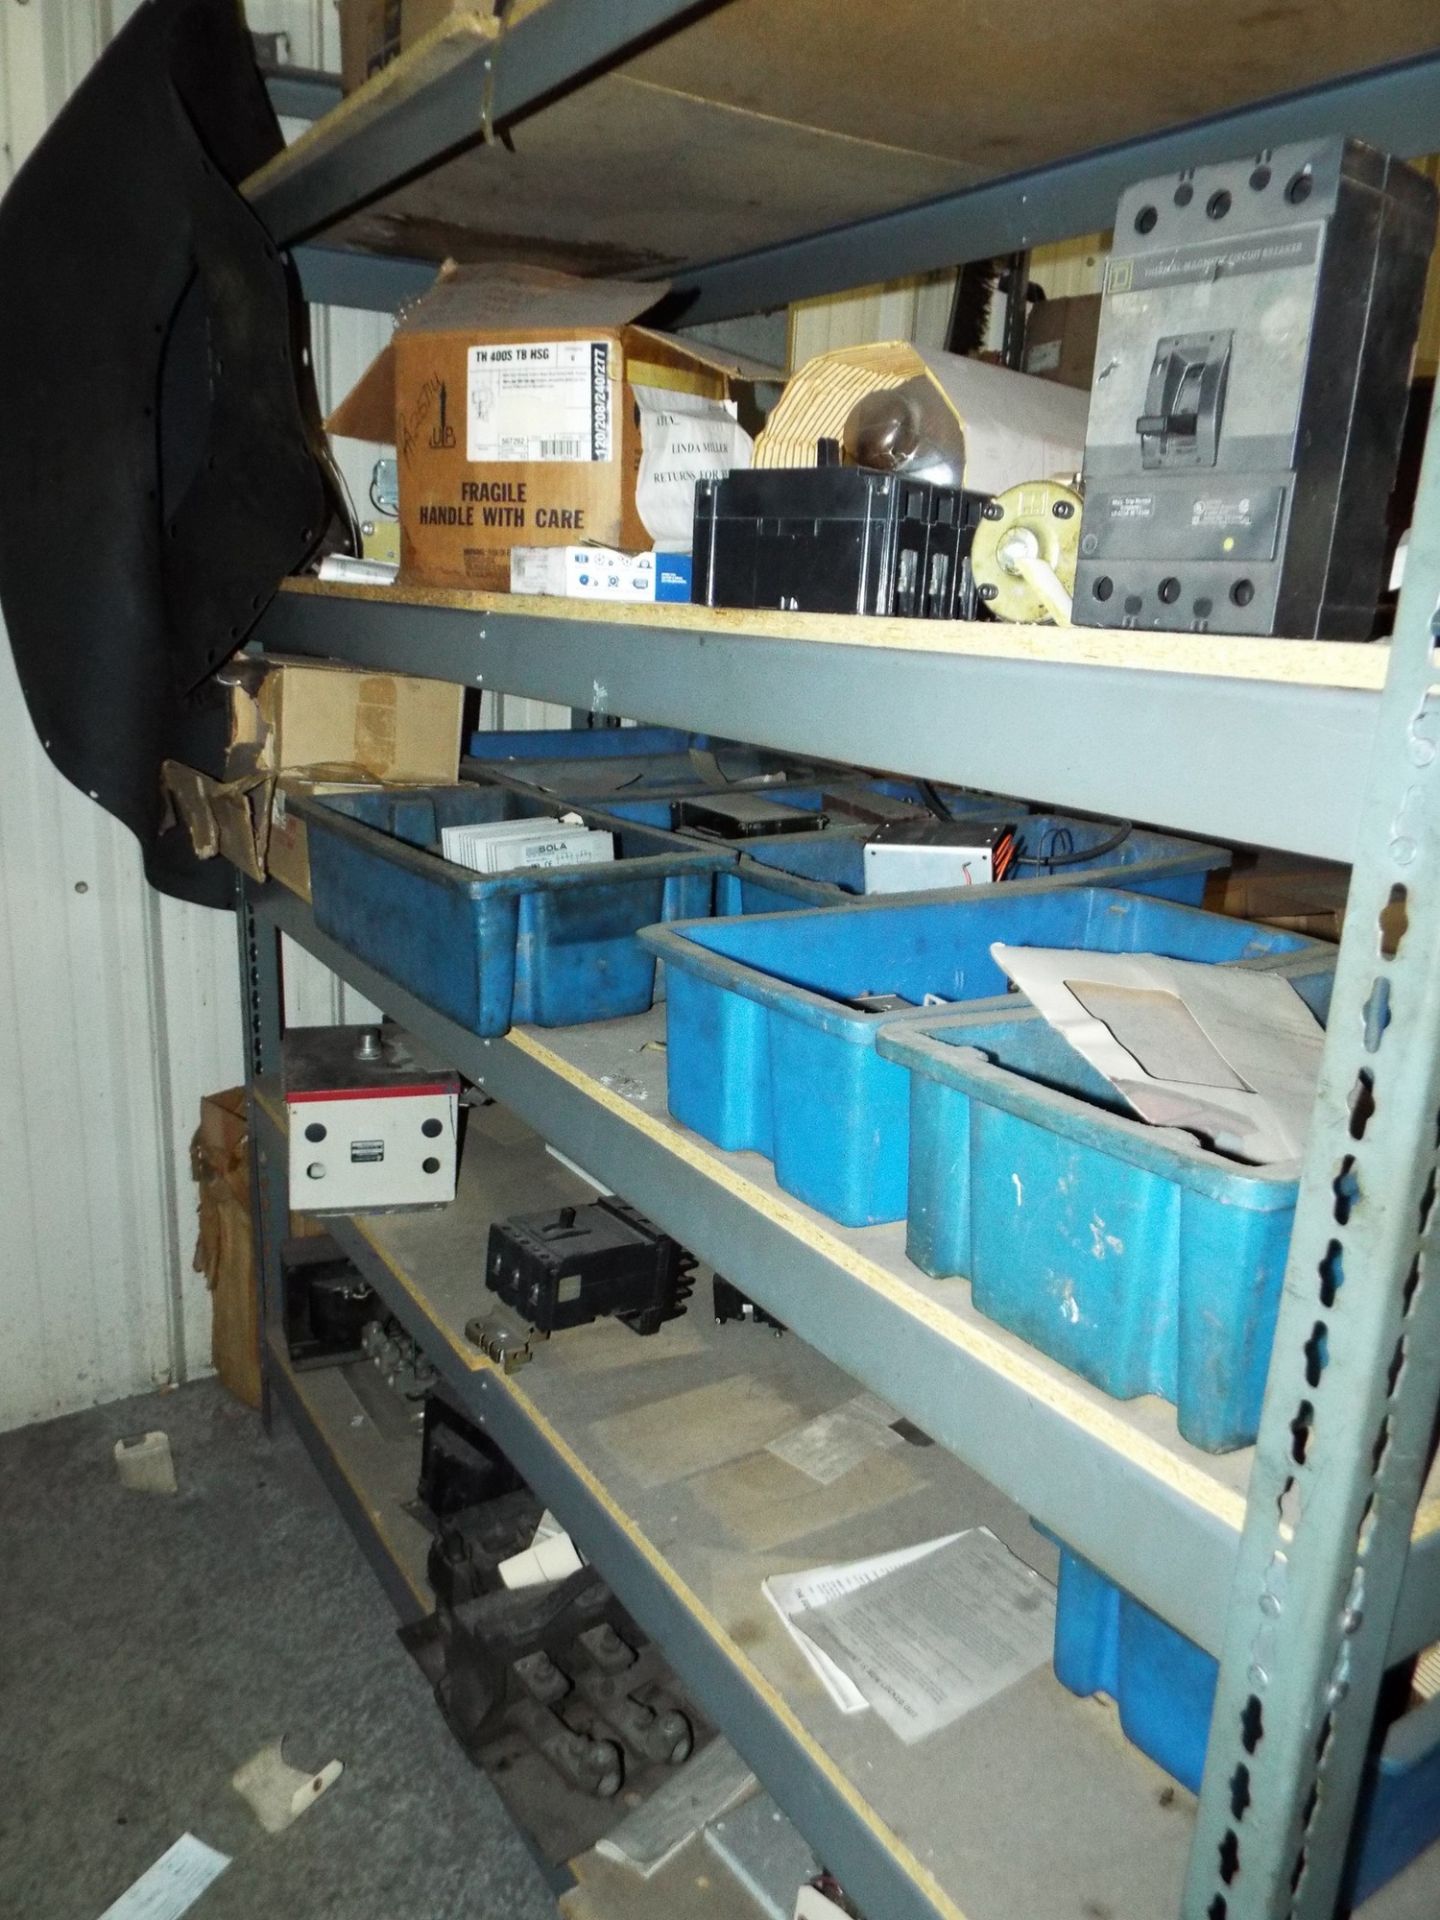 LOT/ SHELF WITH CONTENTS - ELECTRICAL COMPONENTS, BREAKERS, WIRES, PLC COMPONENTS, SPARE PARTS - Image 3 of 3